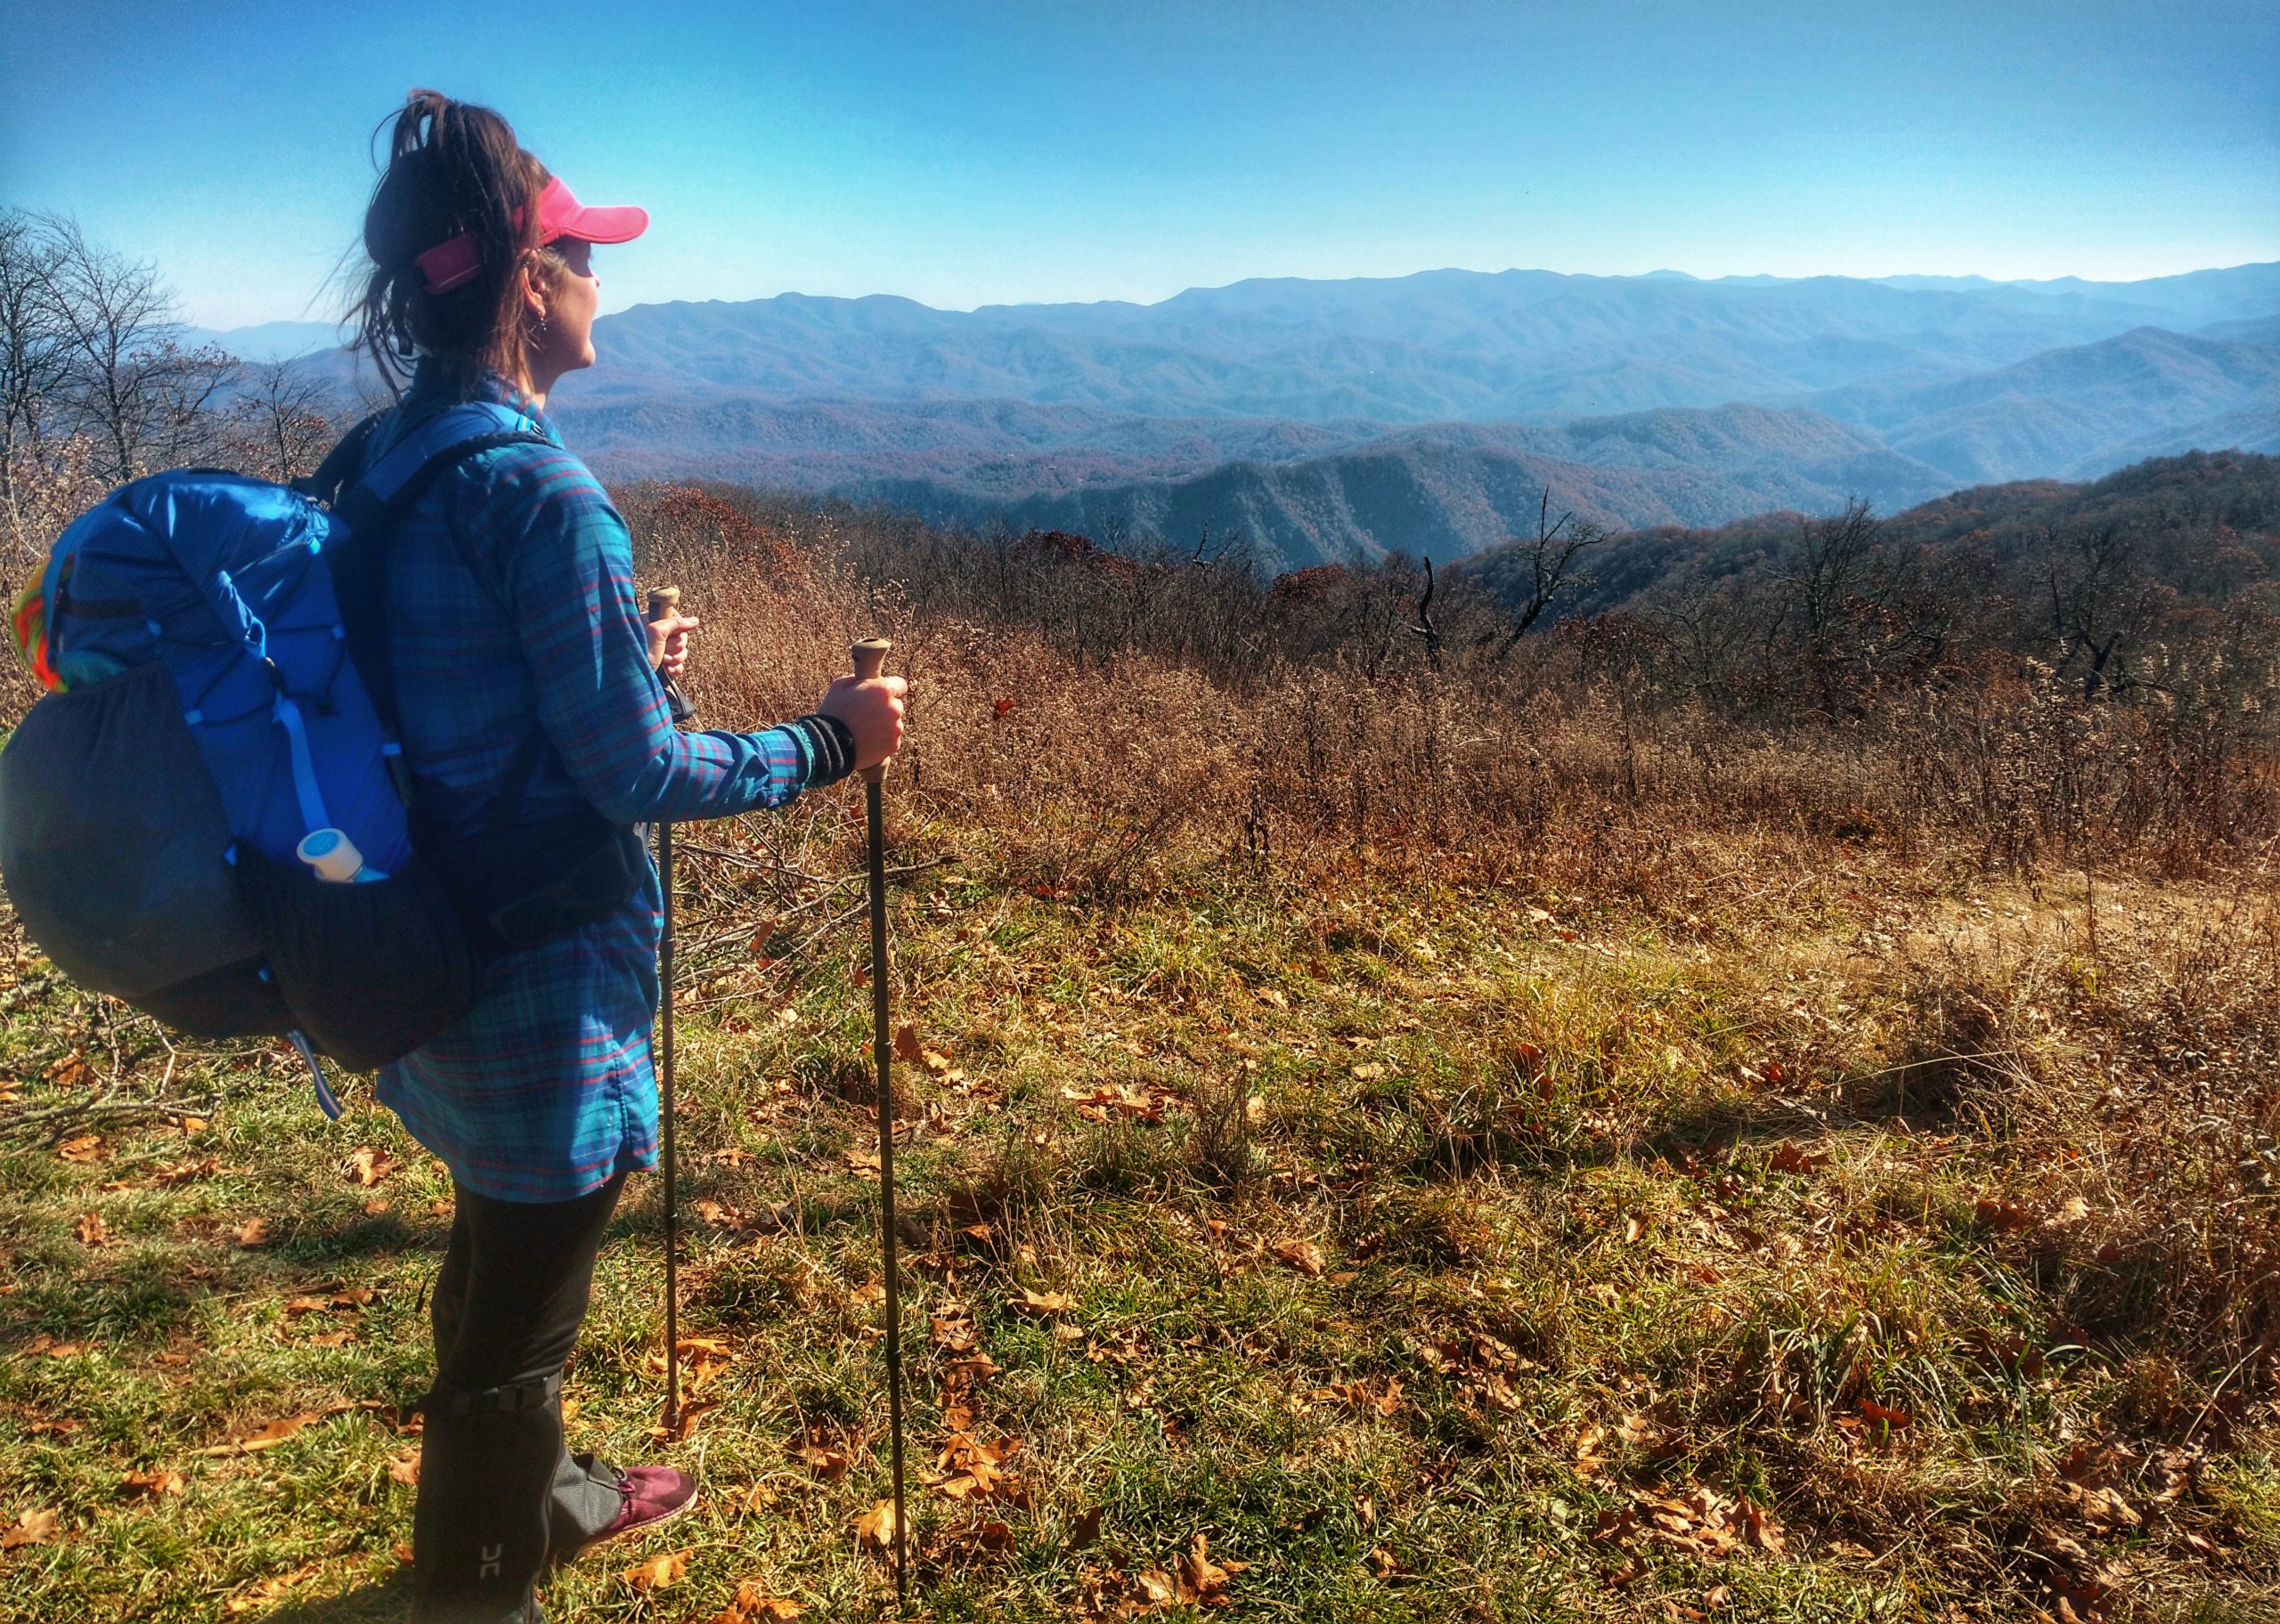 Anish stands with her poles and backpack, gazing out from a field to a rainbow sea of mountains.